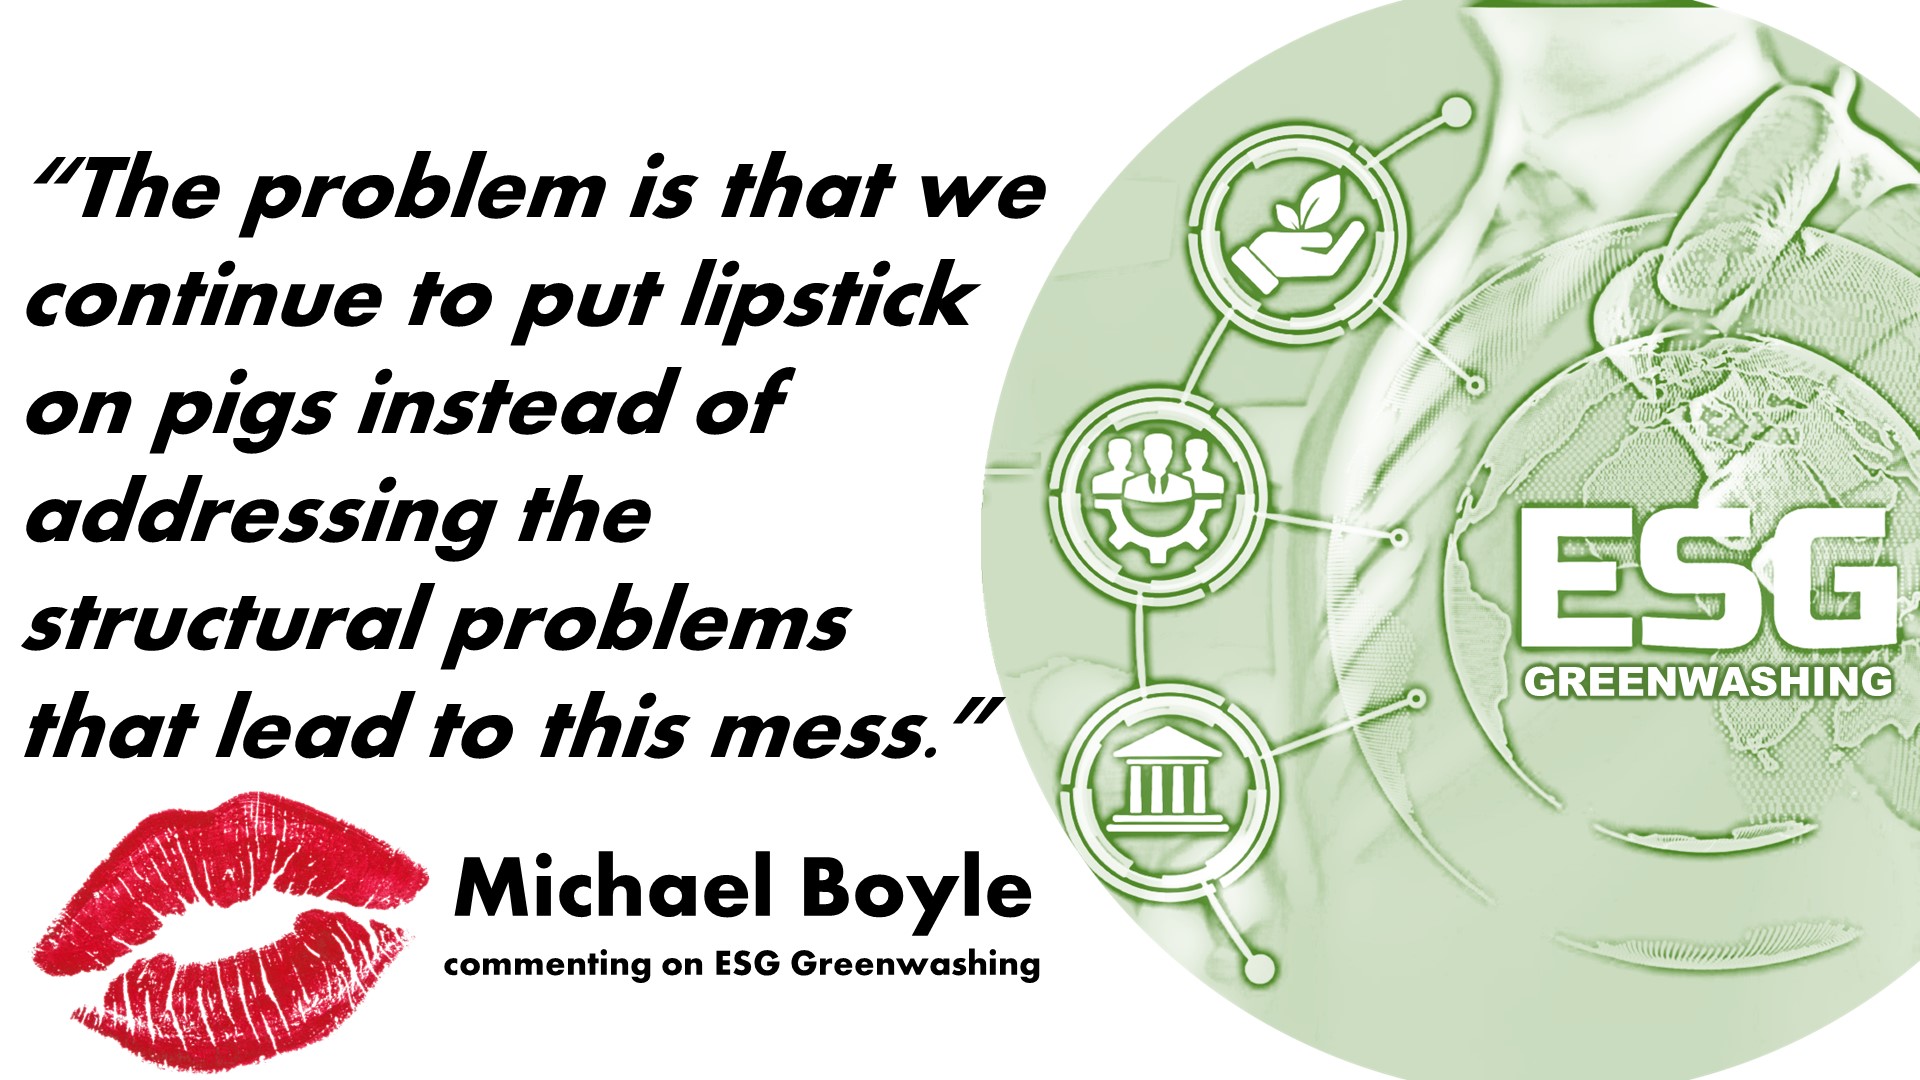 The problem is that we continue to put lipstick on pigs instead of addressing the structural problems that lead to this mess. [Michael Boyle]